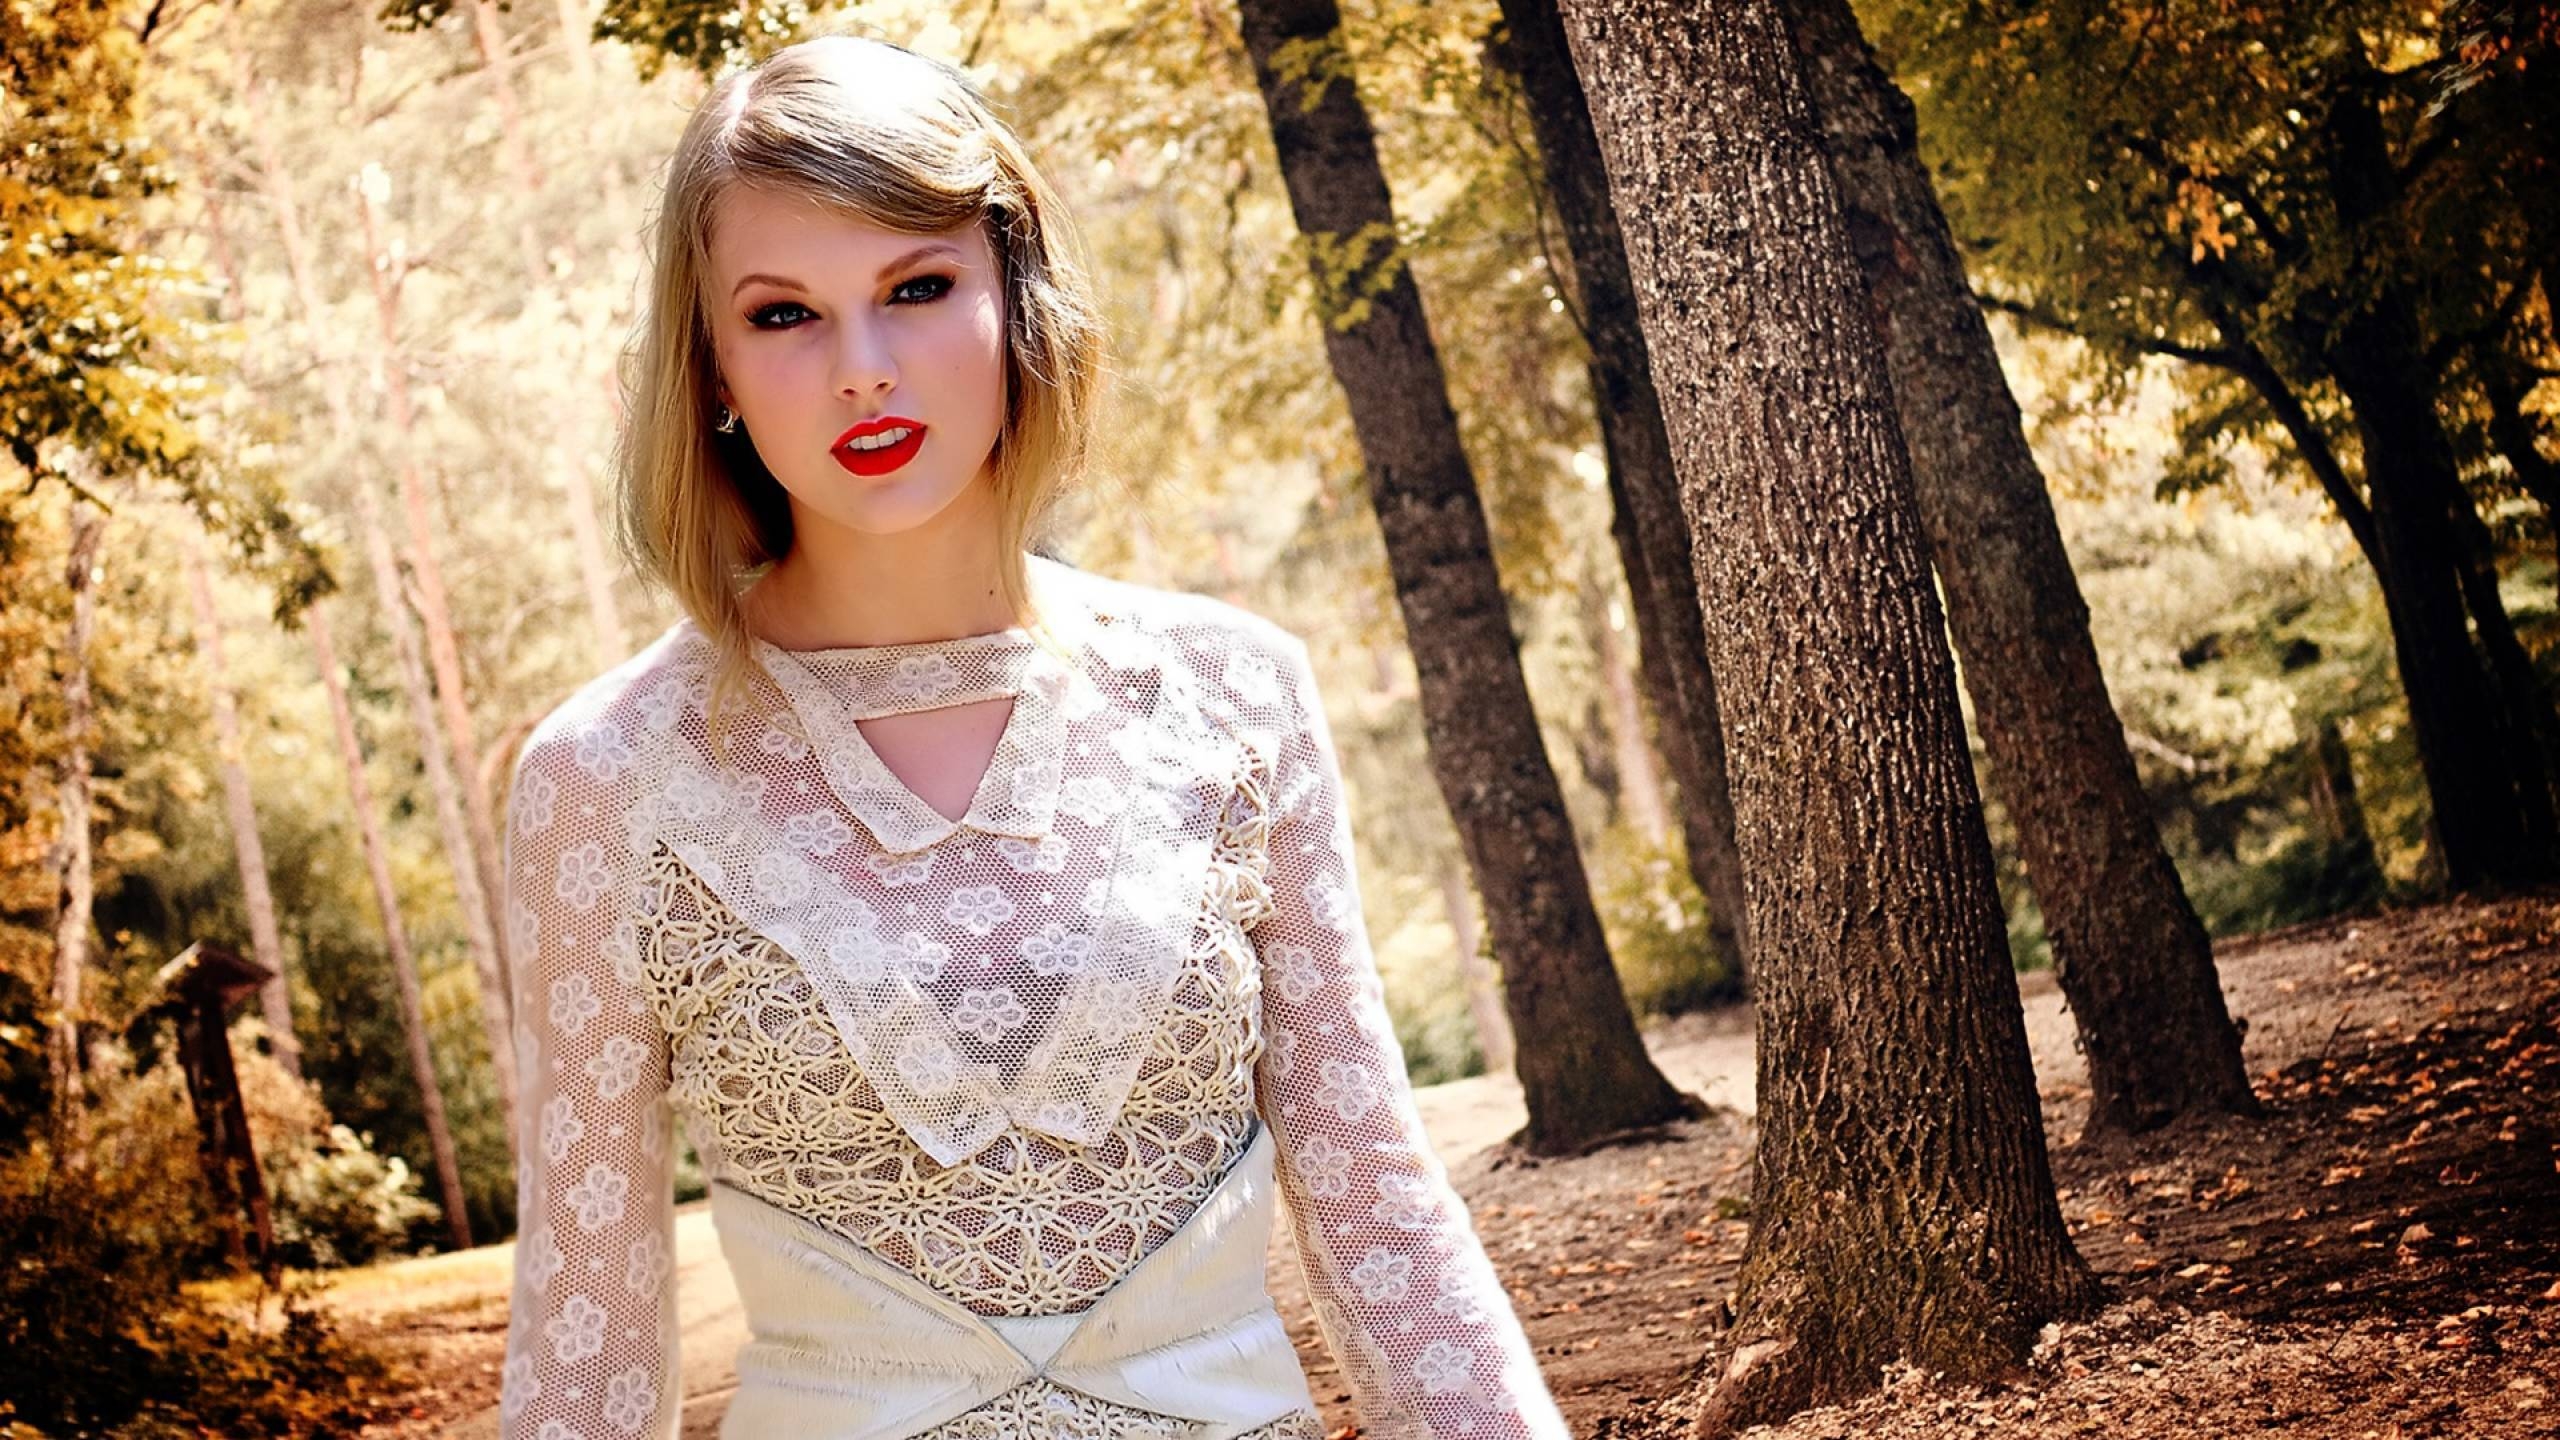 Taylor Swift in Woods for 2560x1440 HDTV resolution